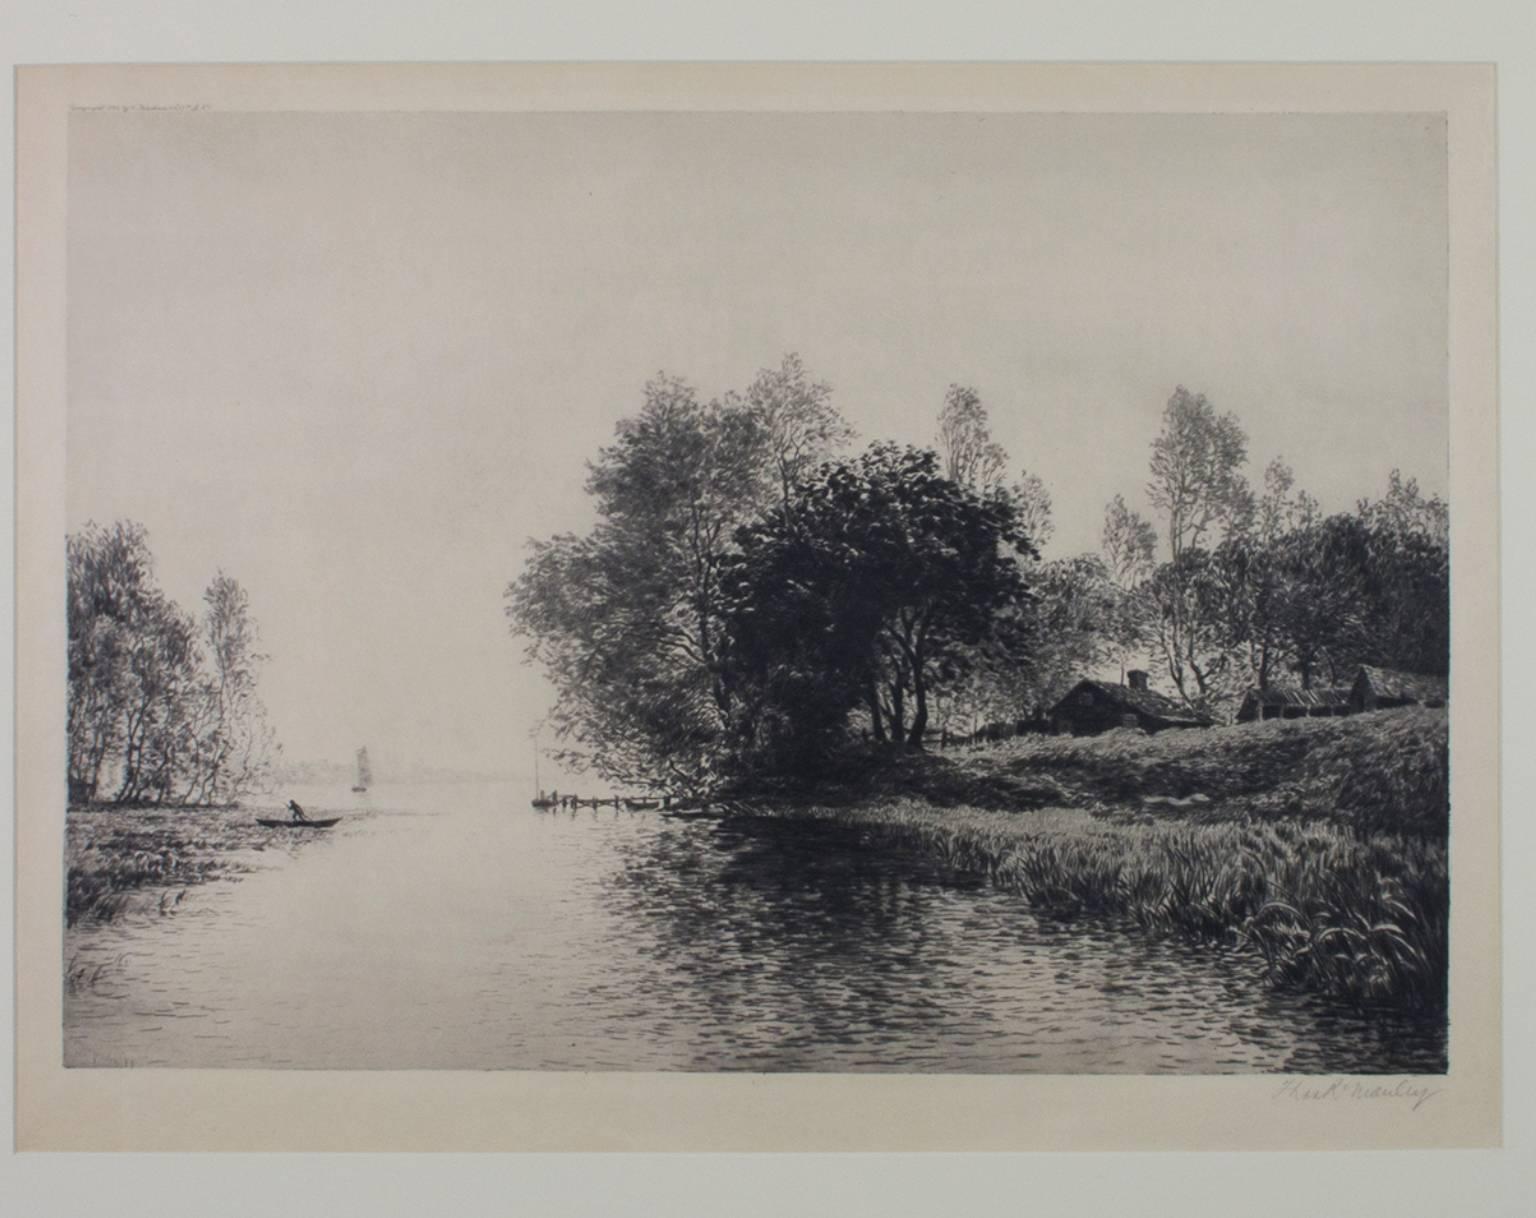 "Farm at Inlet, " an Etching signed by Thomas R. Manley